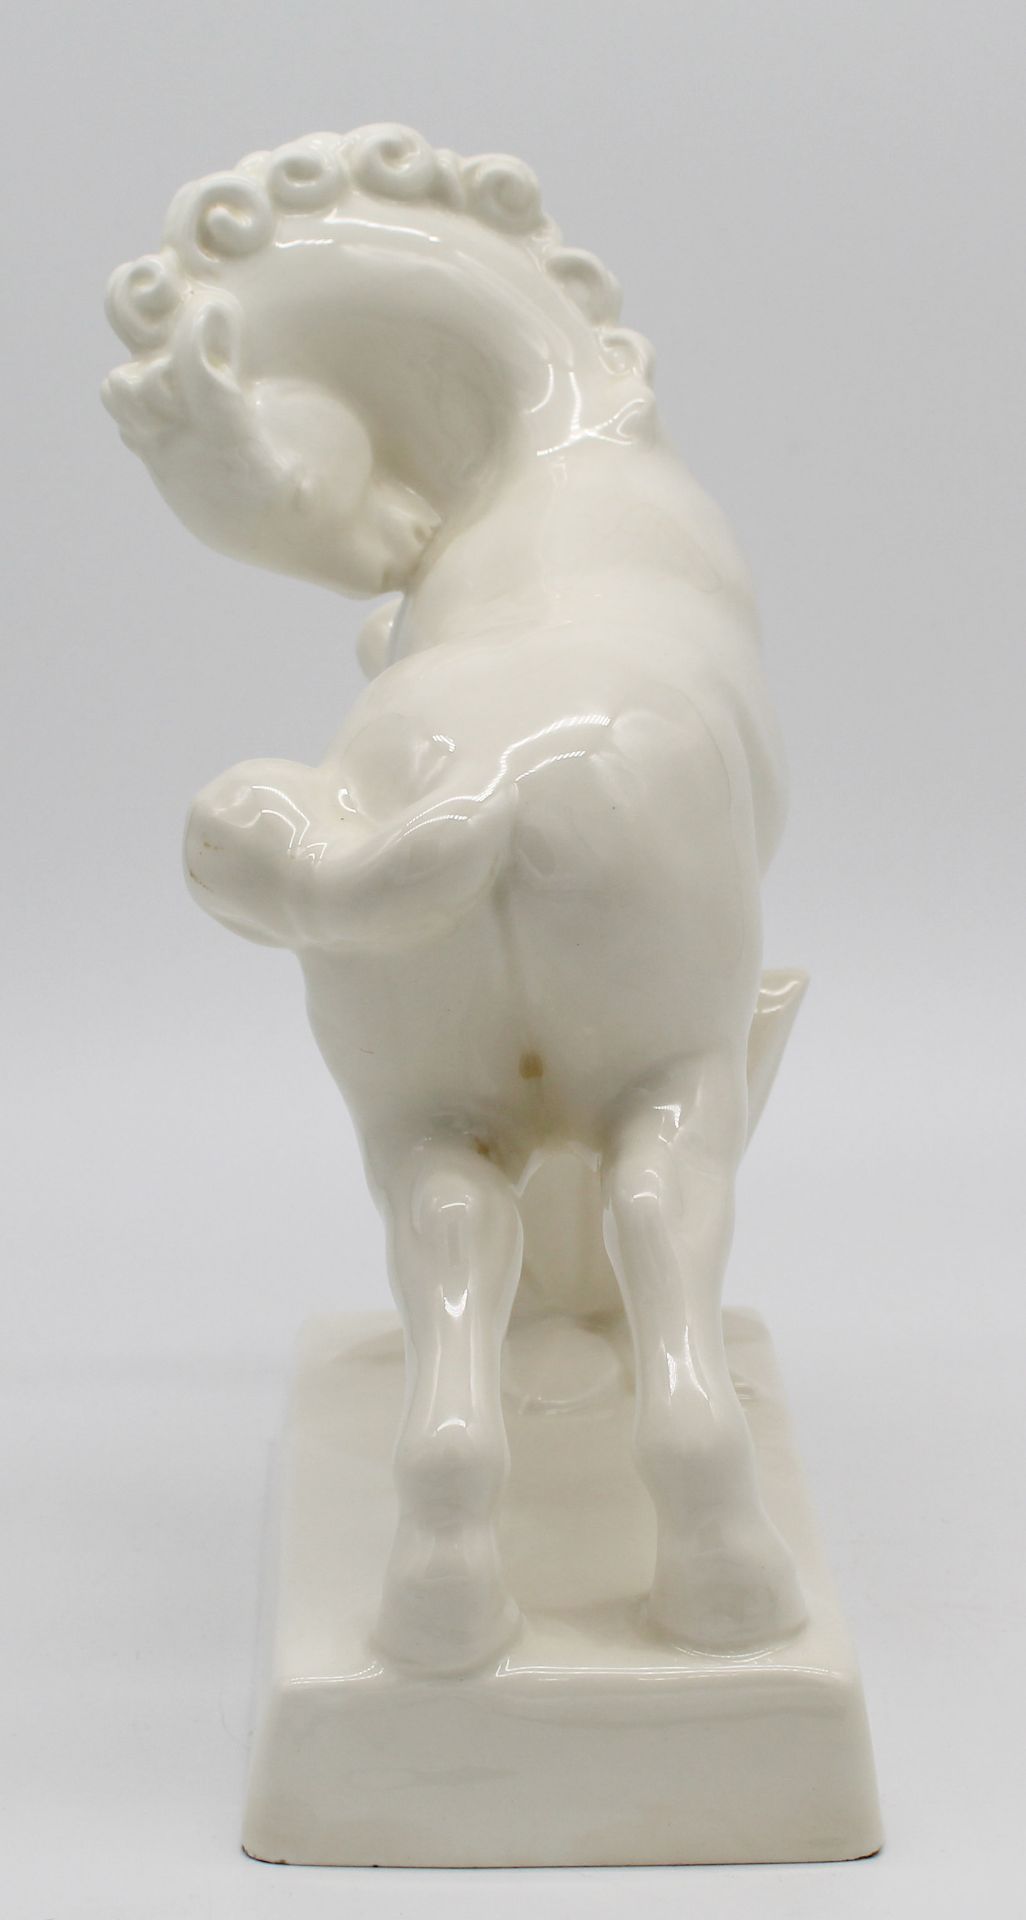 Max ROESLER (act. c. 1930), ceramic sculpture of horses by ROESLER Darmstadt. - Image 8 of 15